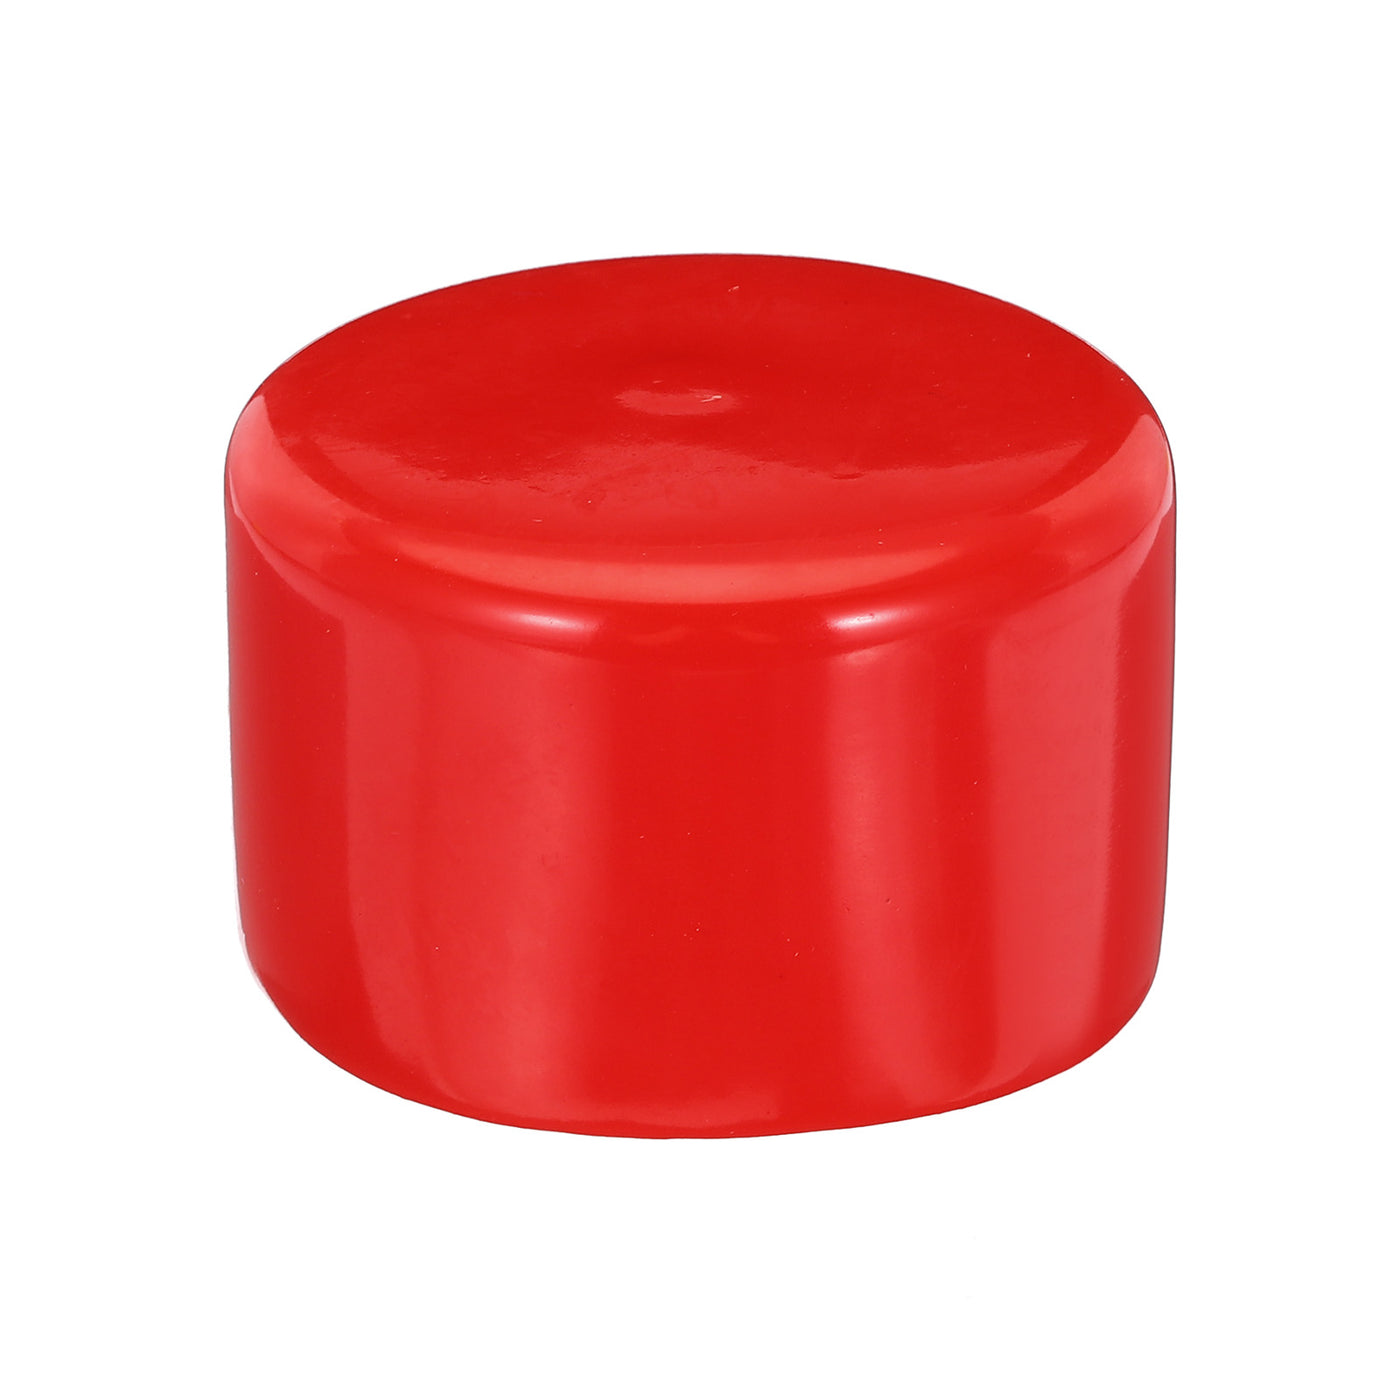 uxcell Uxcell Rubber End Caps 90mm ID Vinyl Round Tube Bolt Cap Cover Screw Thread Protectors Red